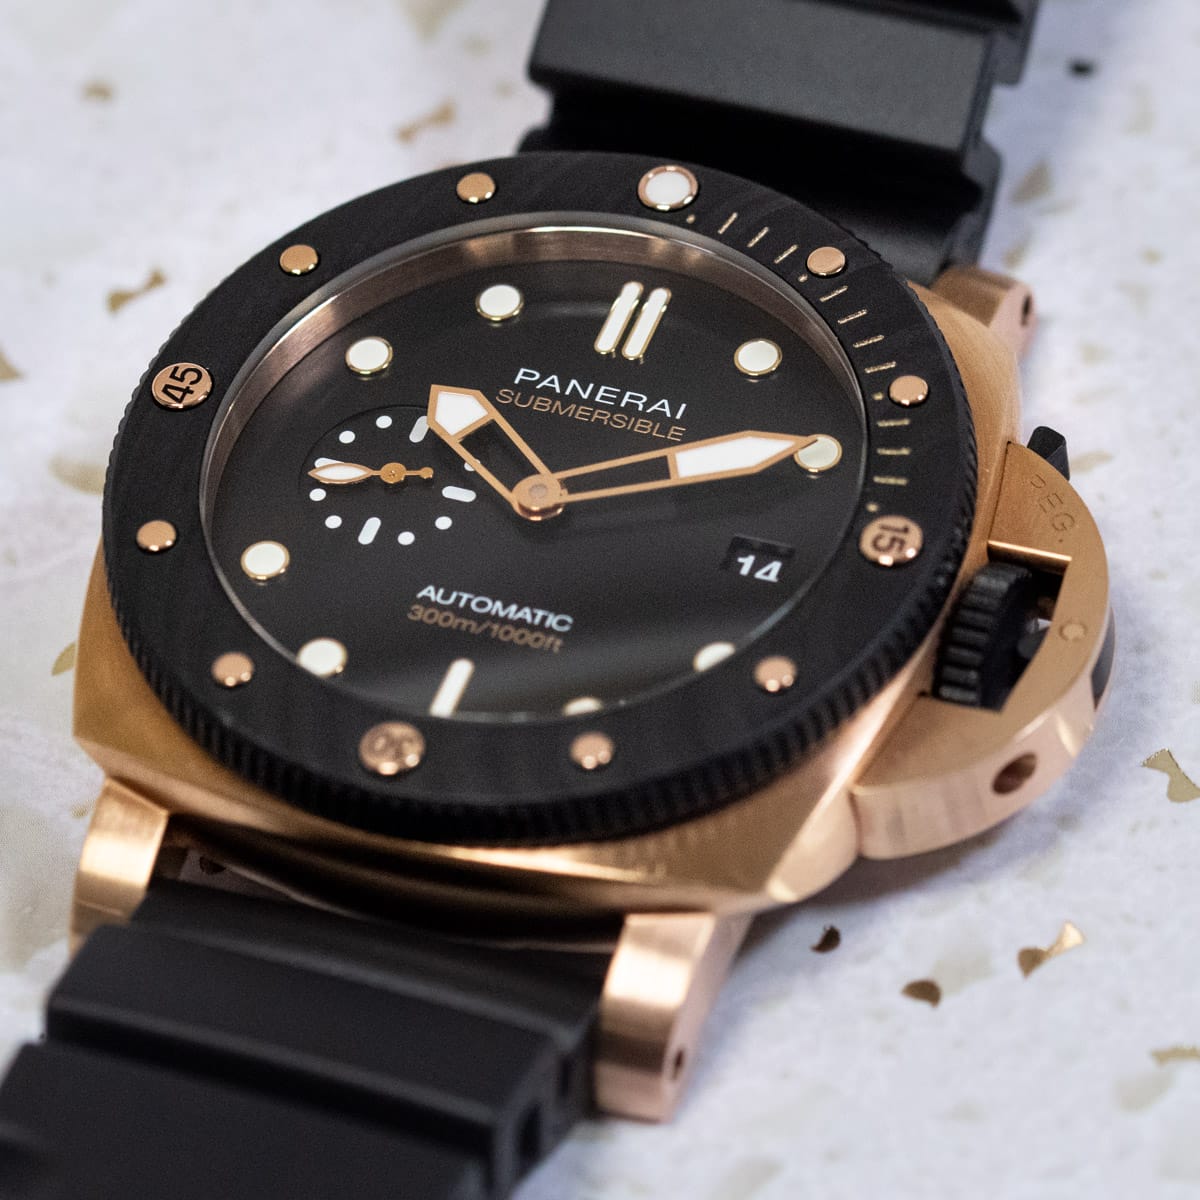 Extra Shot of Submersible QuarantaQuattro Goldtech OroCarbo